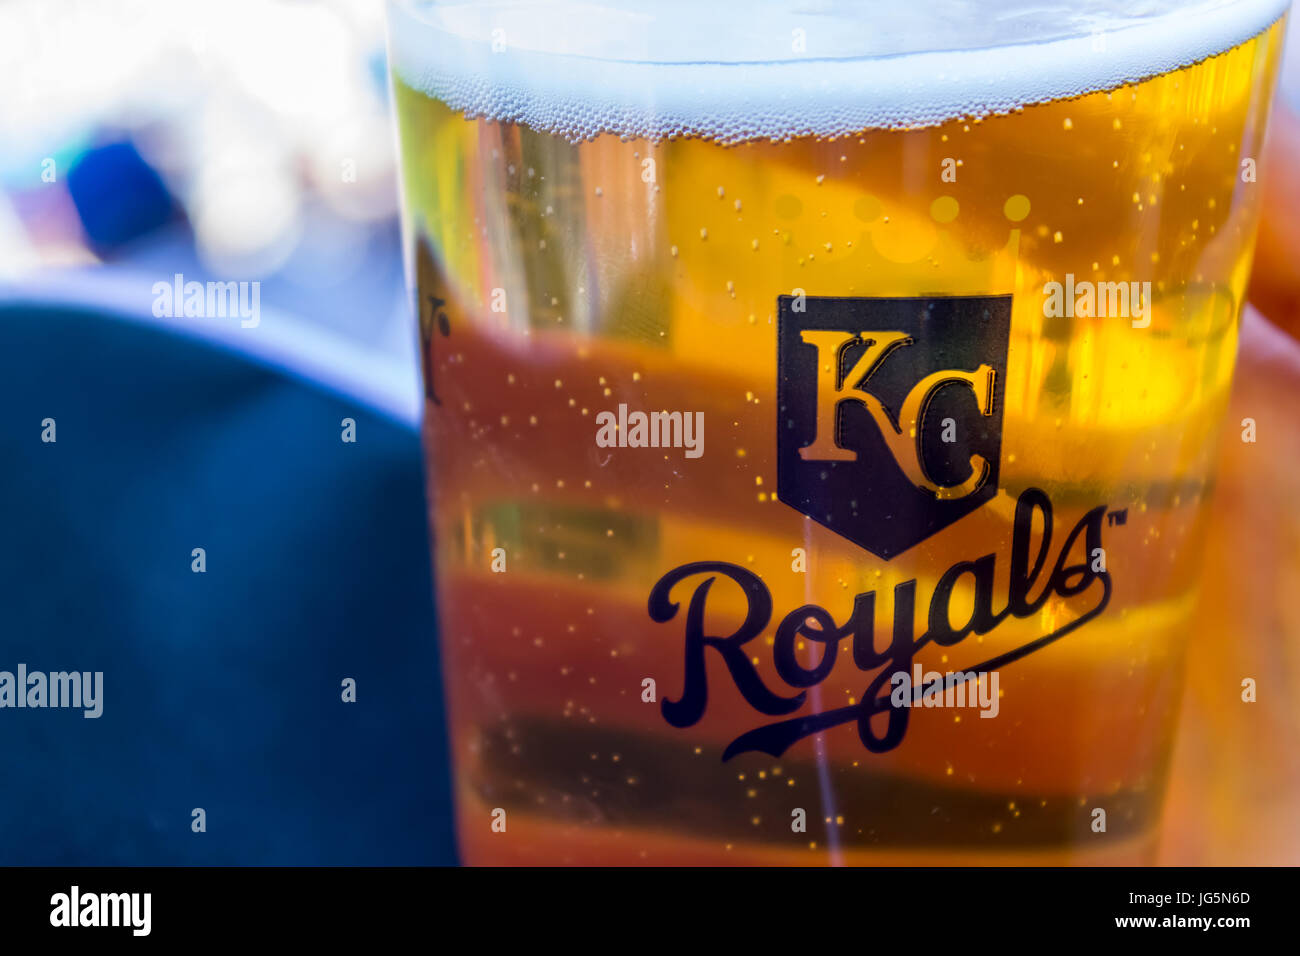 The Emperors' New Clothes: Kansas City Royals Unveil Updated